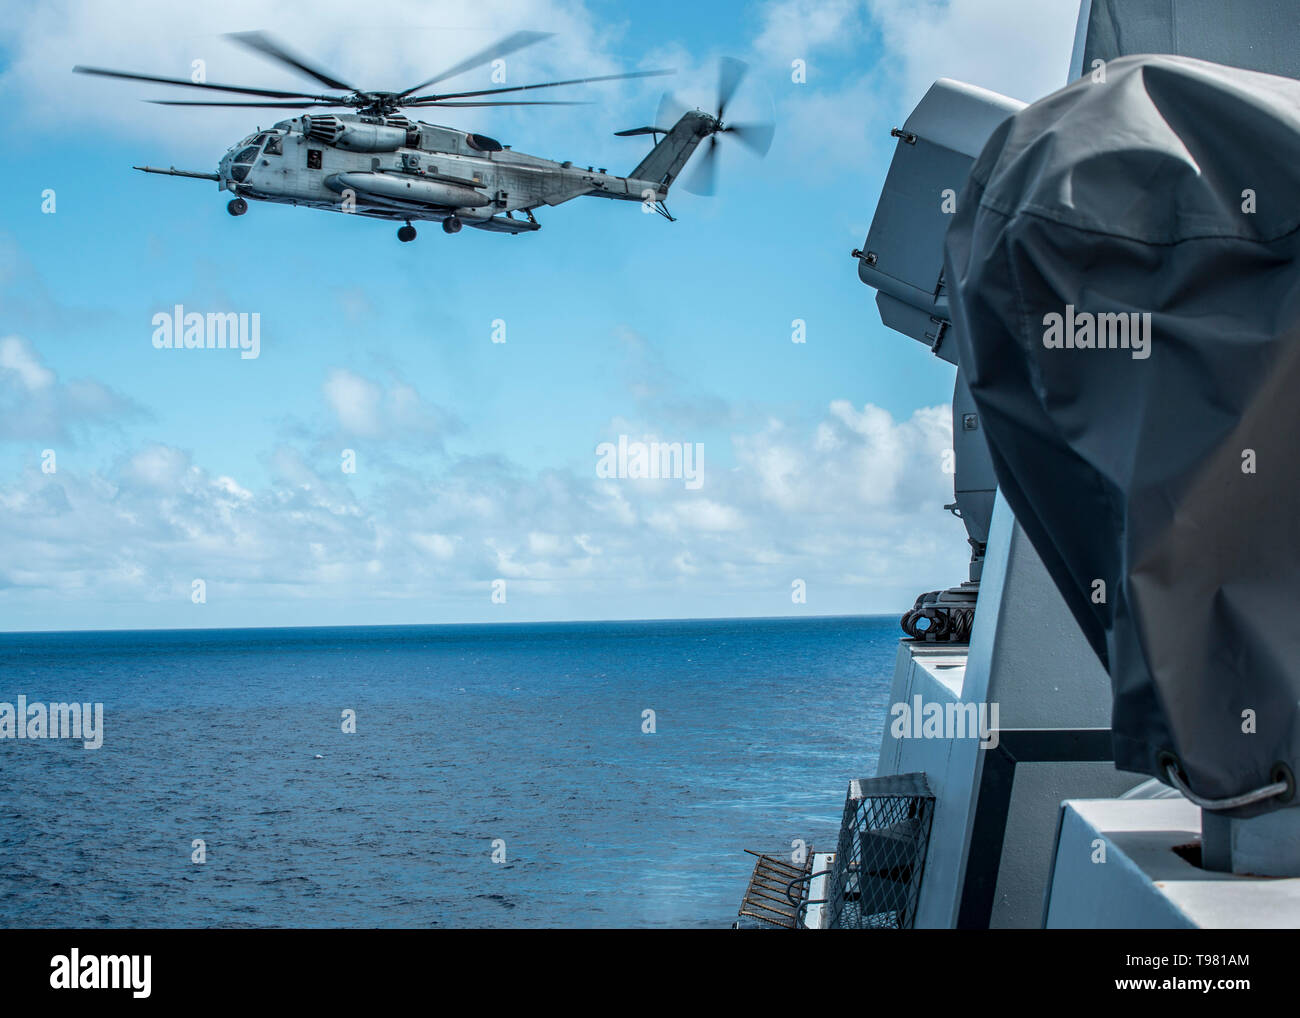 190513-M-QS181-0084 PACIFIC OCEAN (May 13, 2019) U.S. Marines with Marine Aircraft Group (MAG) 24 depart the San Antonio-class amphibious transport dock ship USS John P. Murtha (LPD 26) in a CH-53 Super Stallion. The Marines and Sailors of the 11th Marine Expeditionary Unit are conducting routine operations as part of the Boxer Amphibious Ready Group. (U.S. Marine Corps photo by Cpl. Jason Monty) Stock Photo